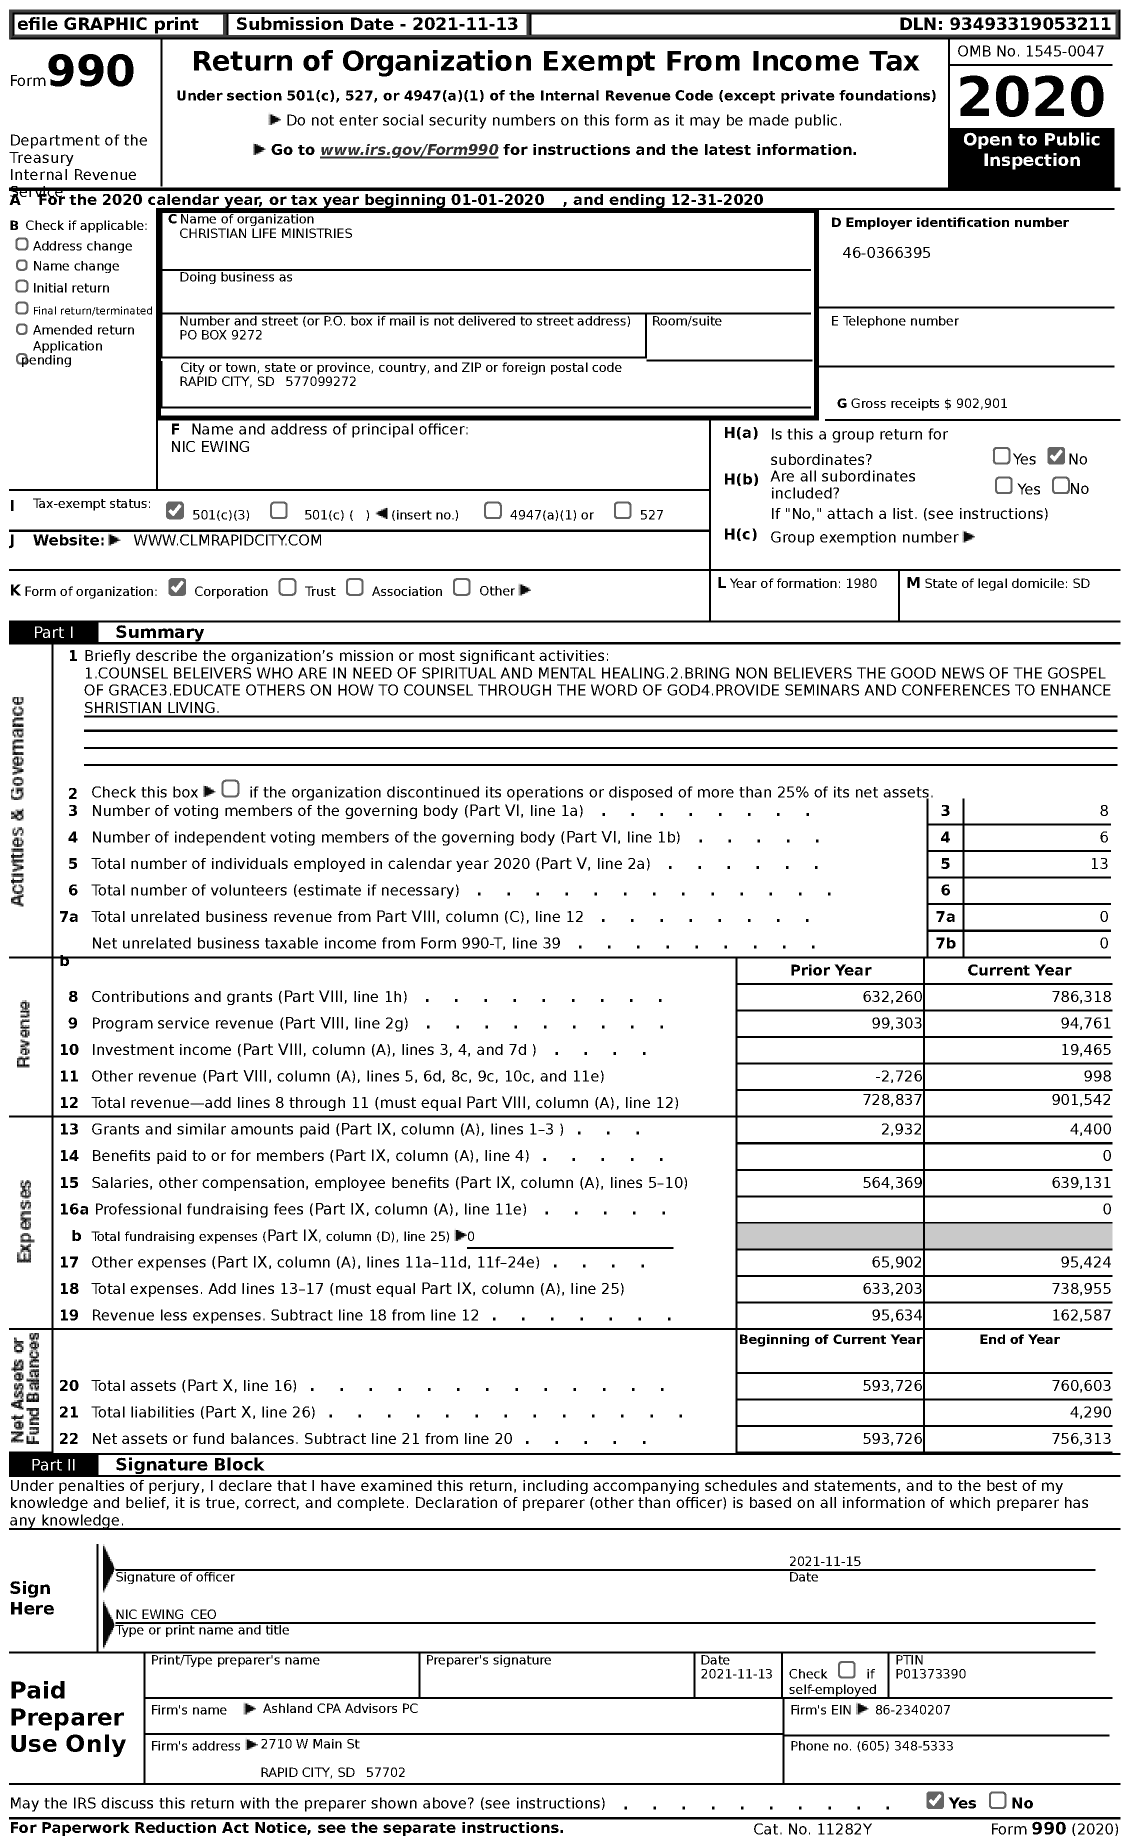 Image of first page of 2020 Form 990 for Christian Life Ministries